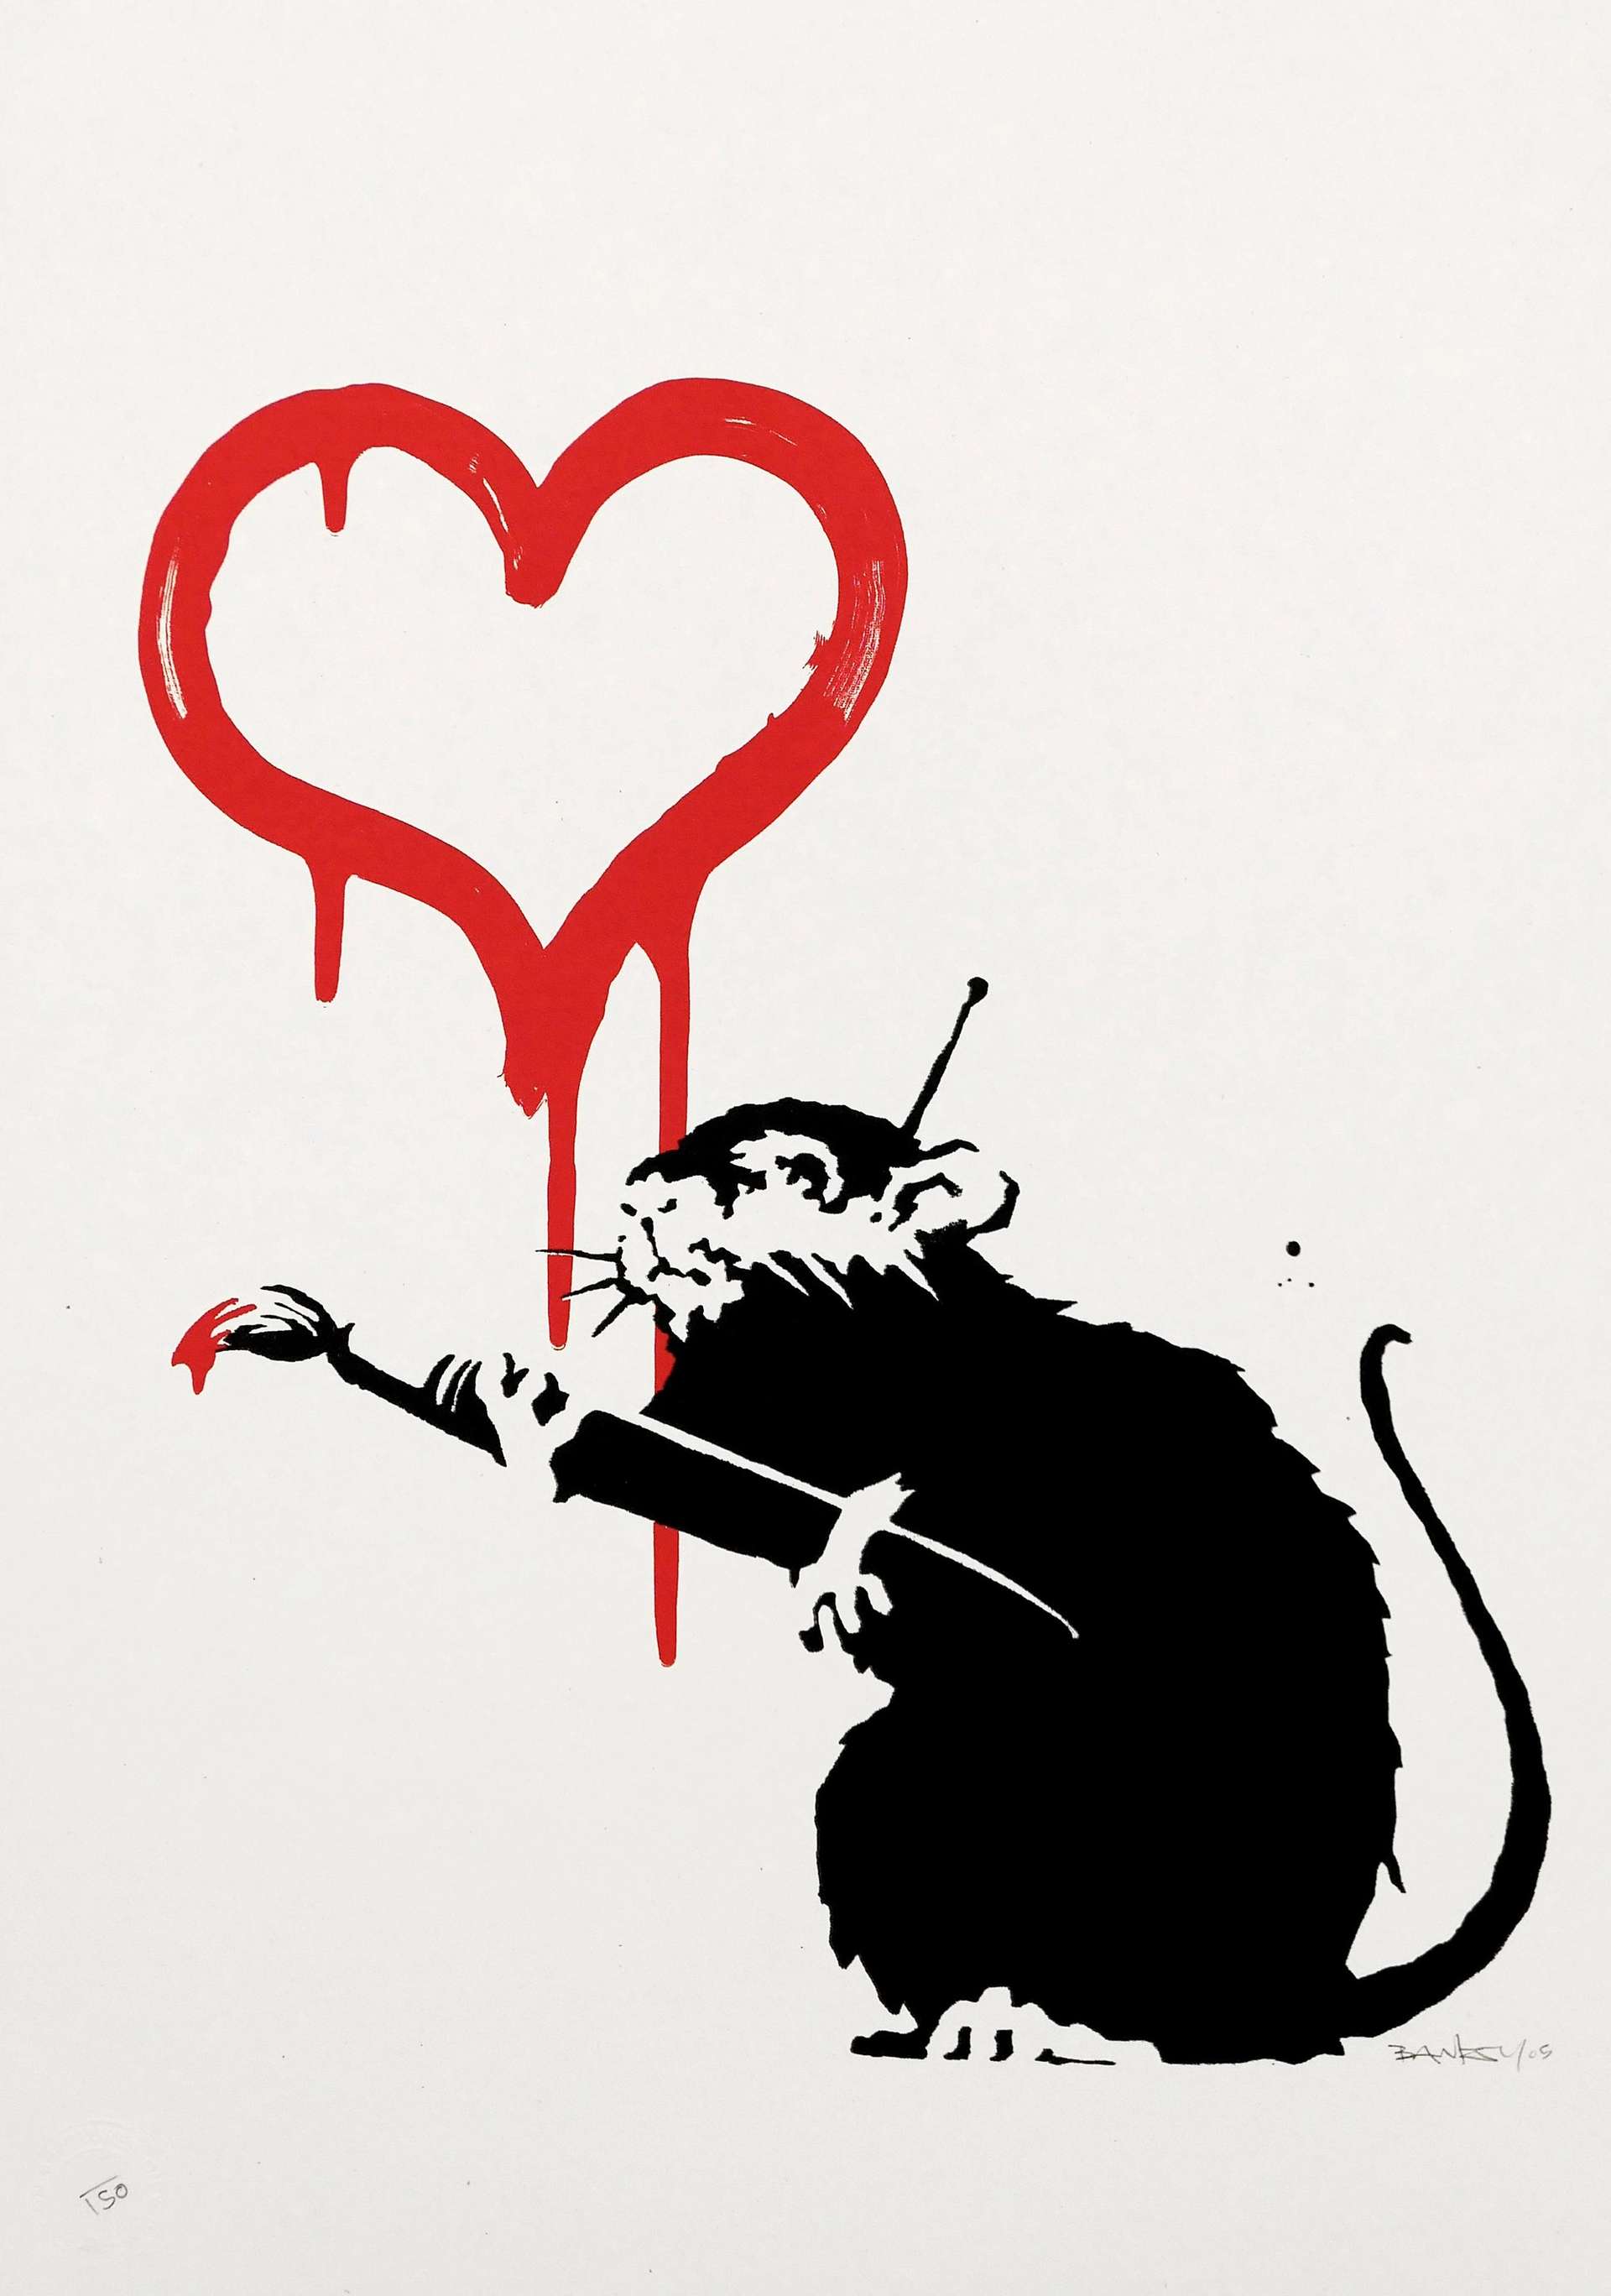 A screenprint by Banksy depicting a black ink rat holding a paintbrush, with a dripping red heart behind it.